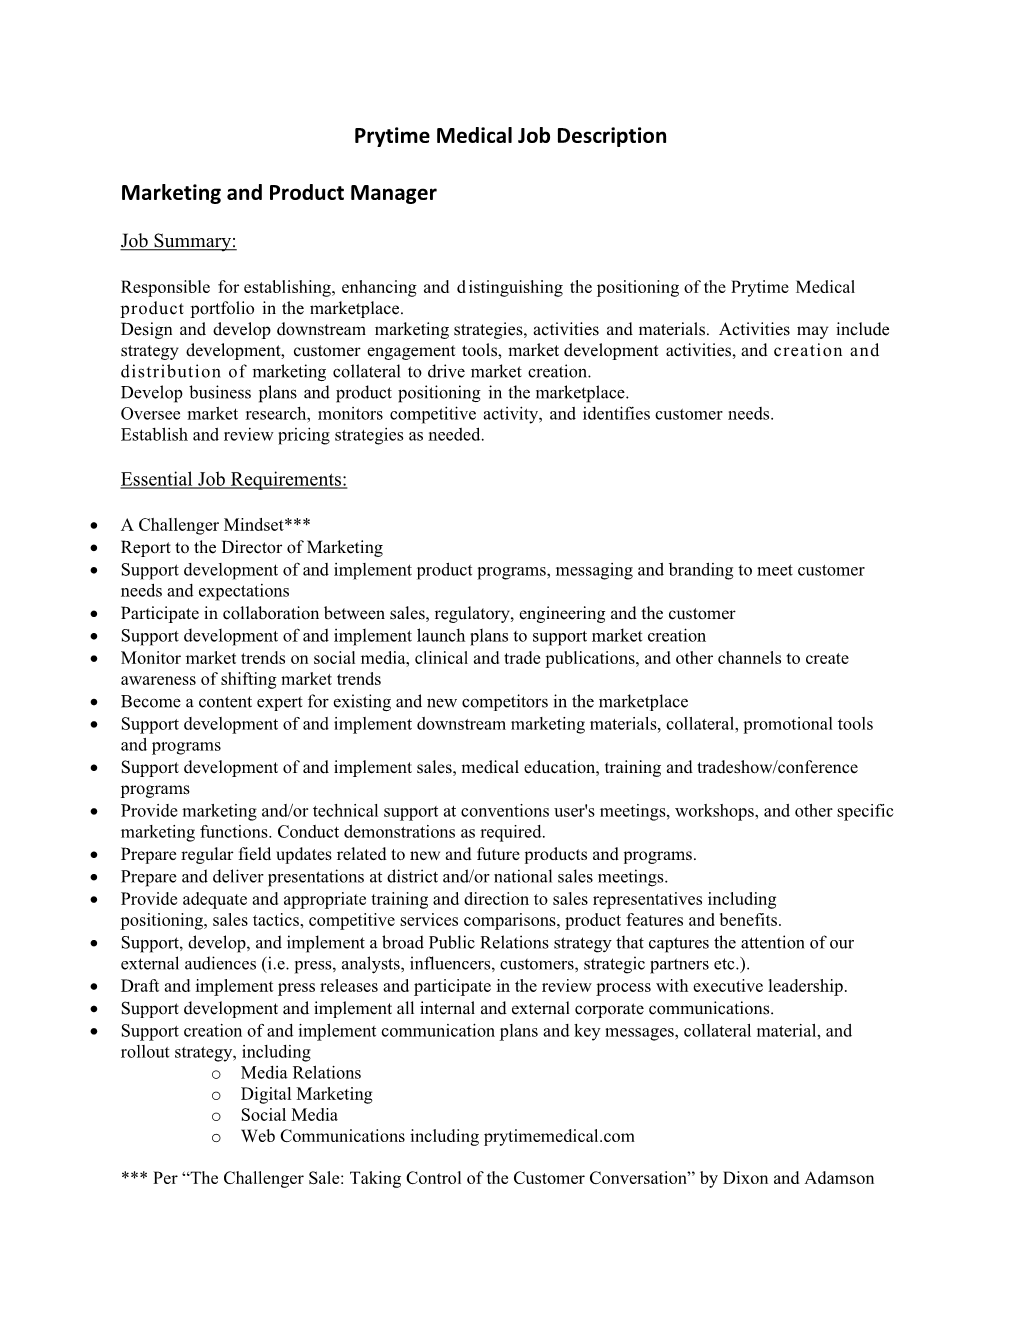 Prytime Medical Job Description Marketing and Product Manager